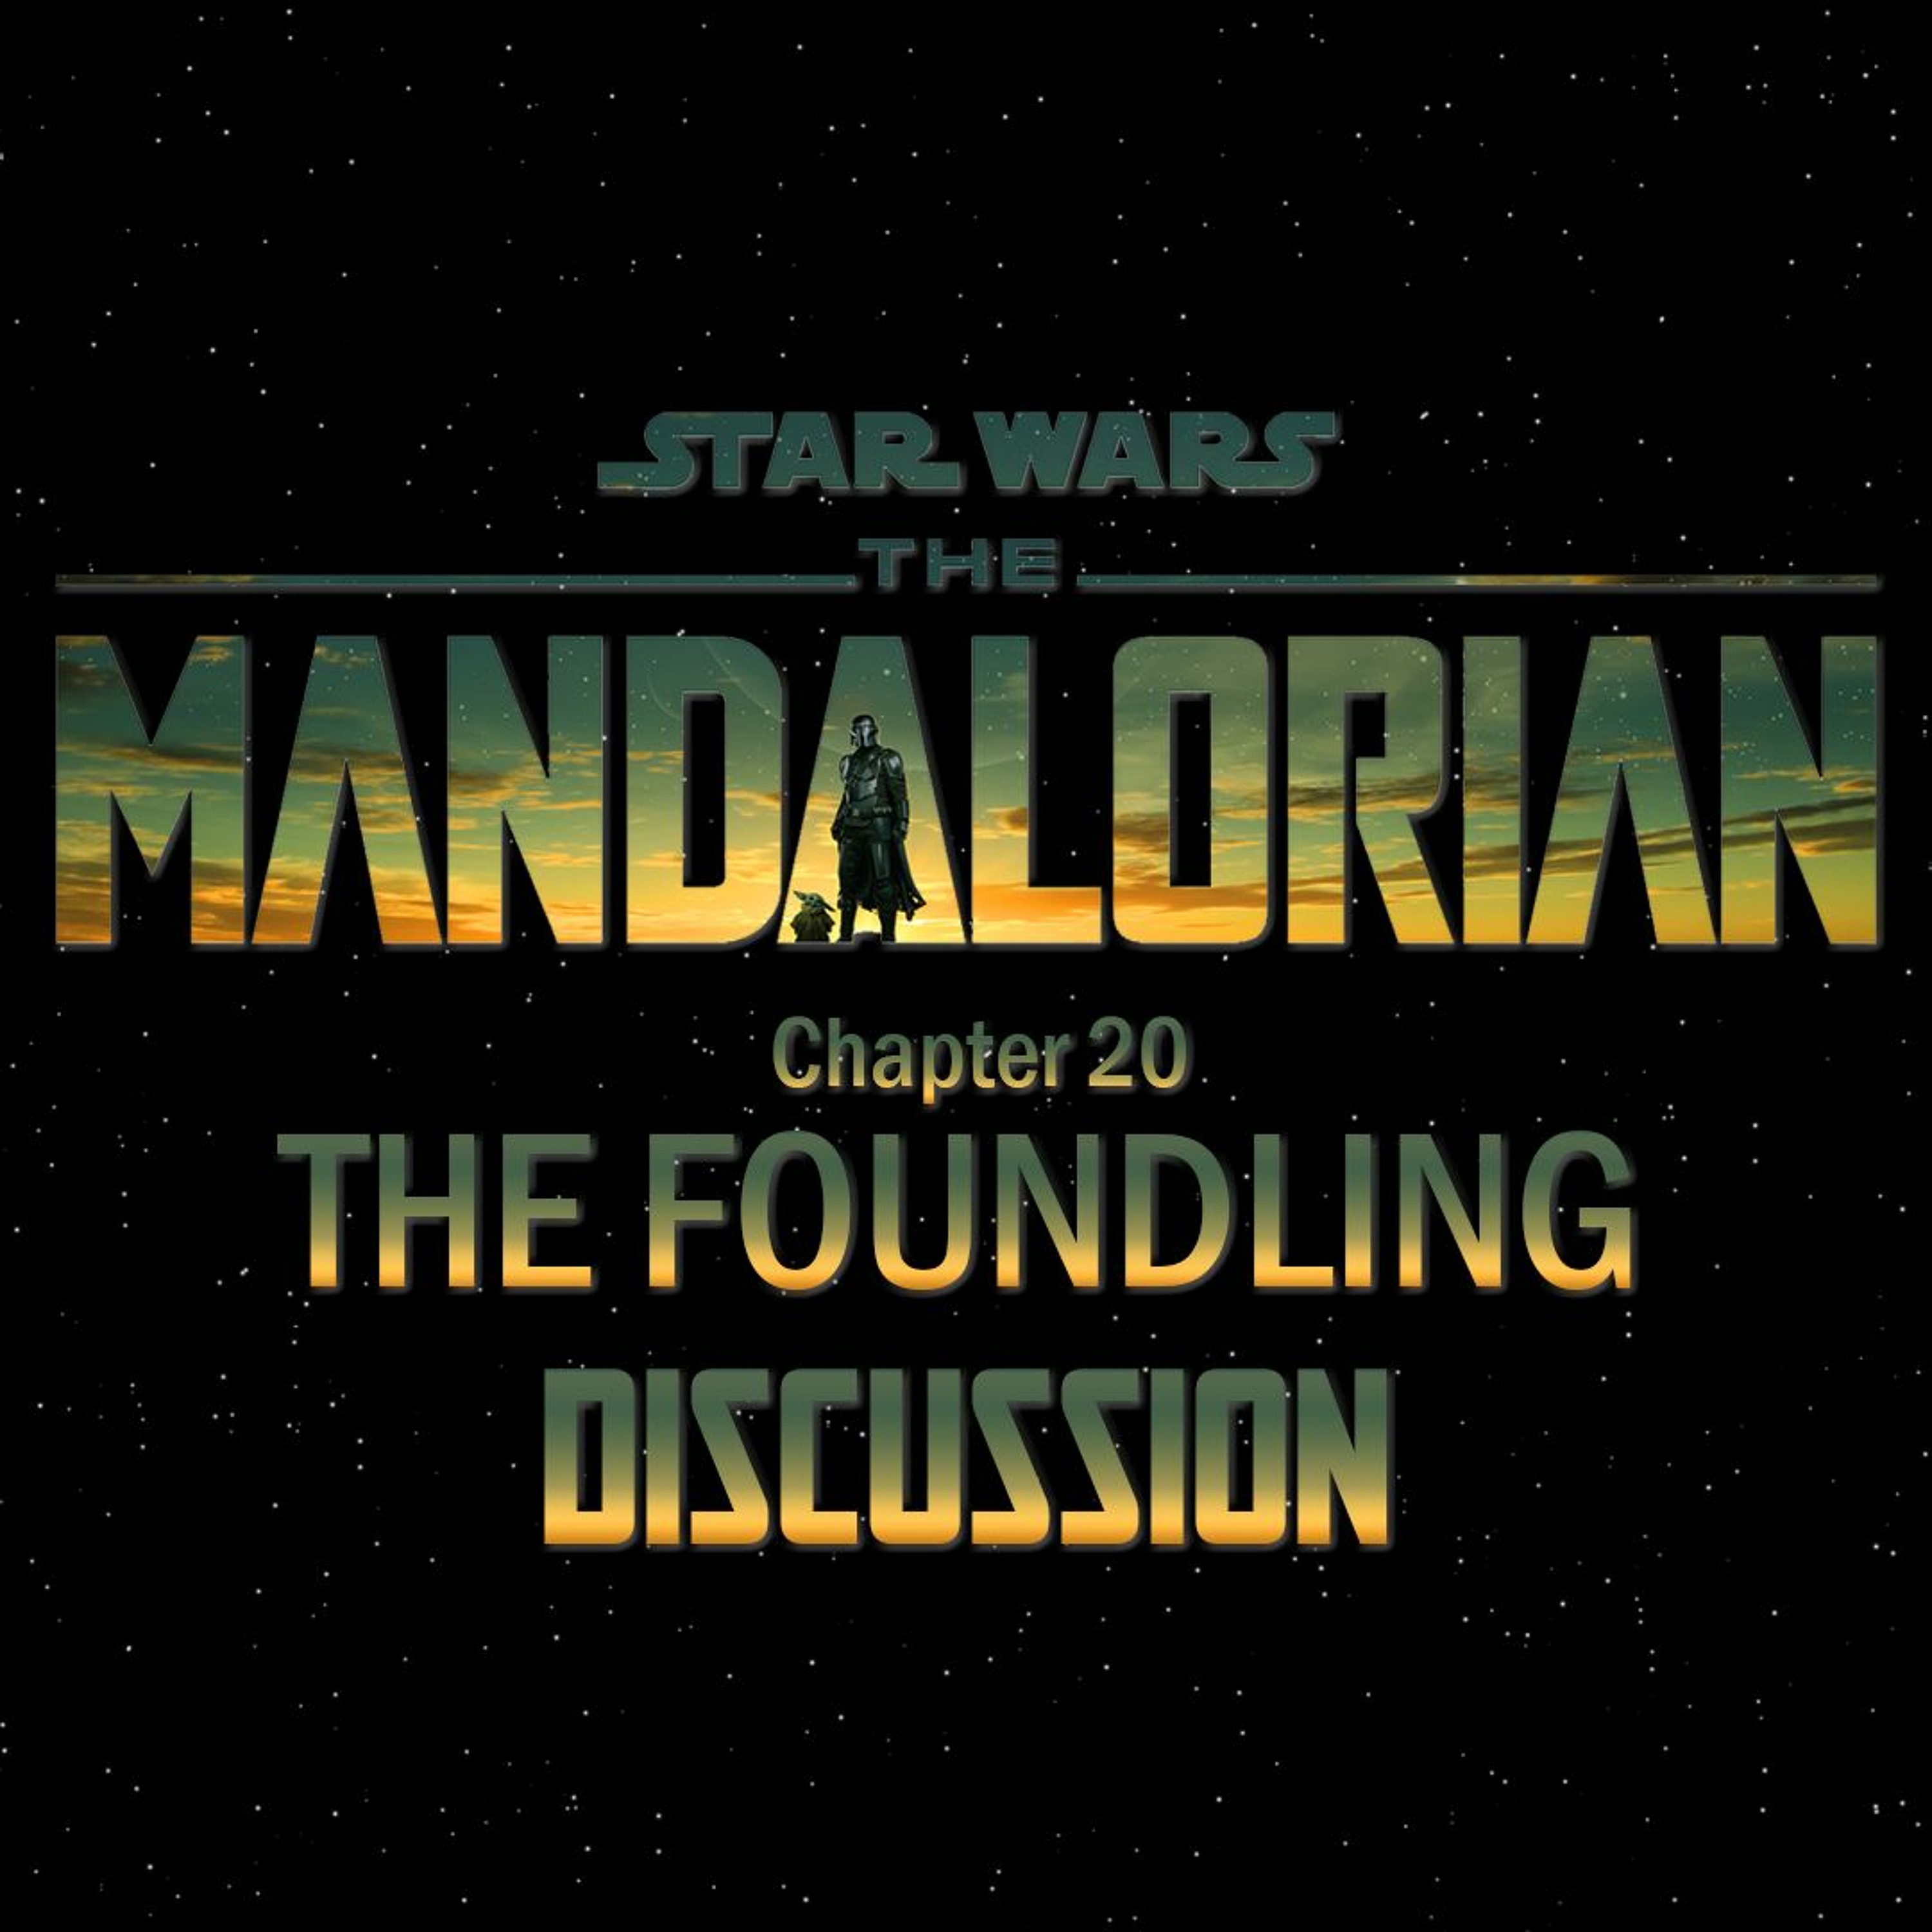 The Mandalorian Chapter 20: The Foundling